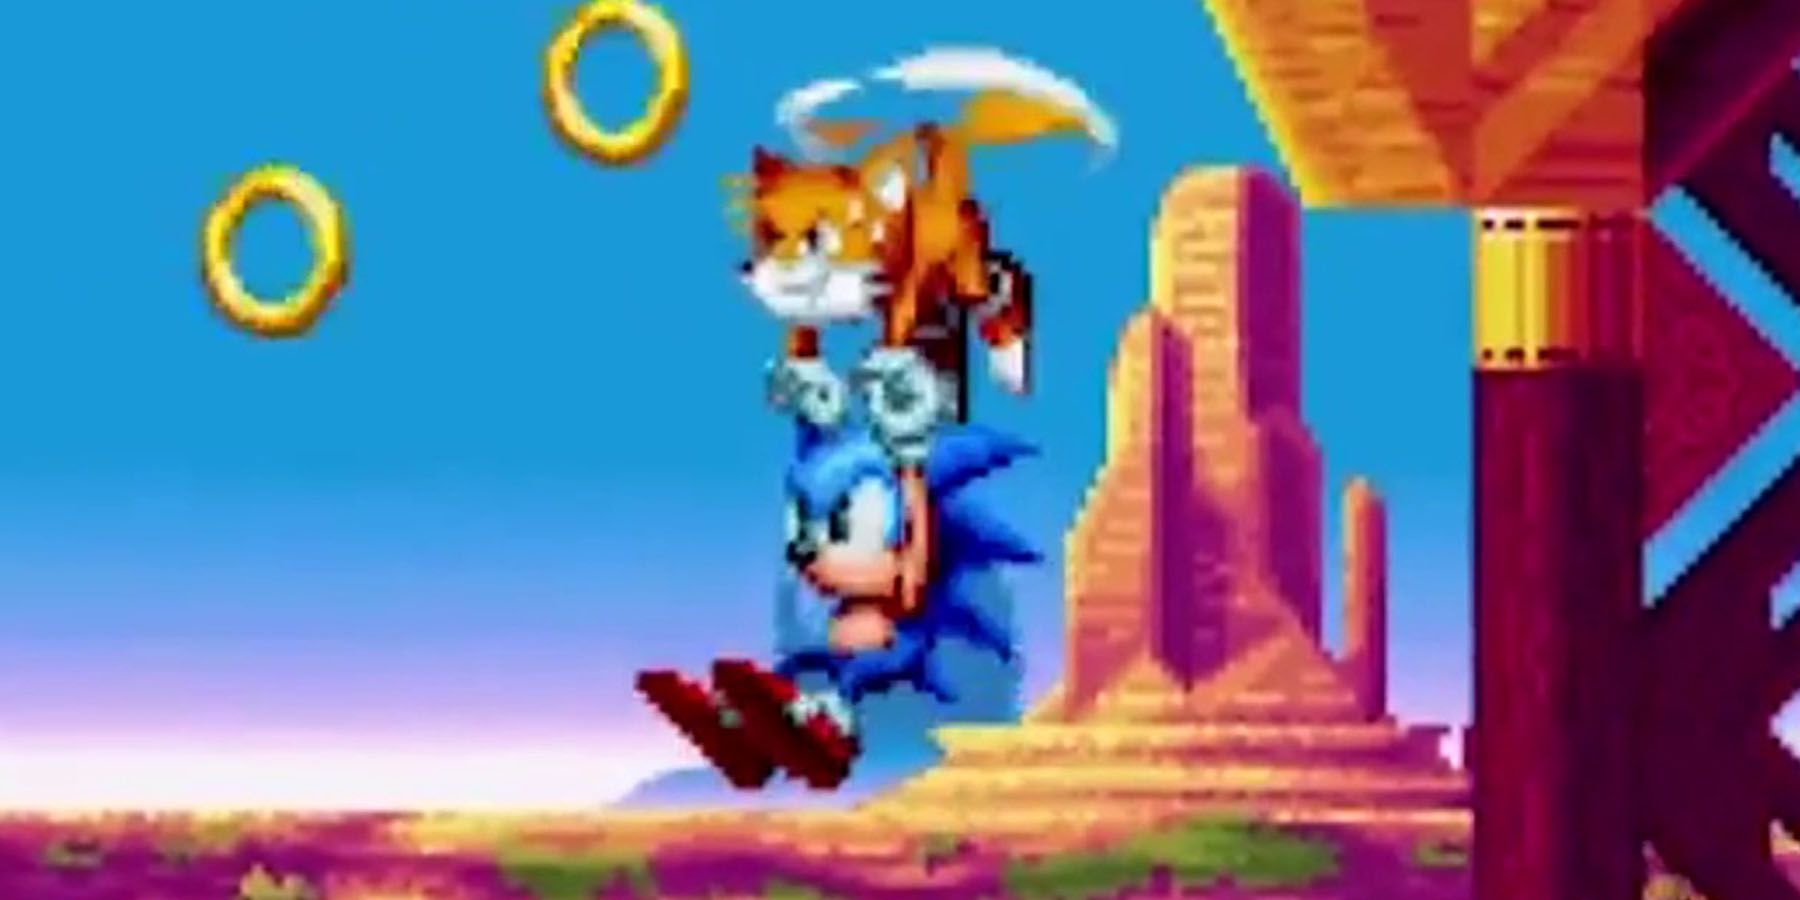 Tails lifting Sonic in the air